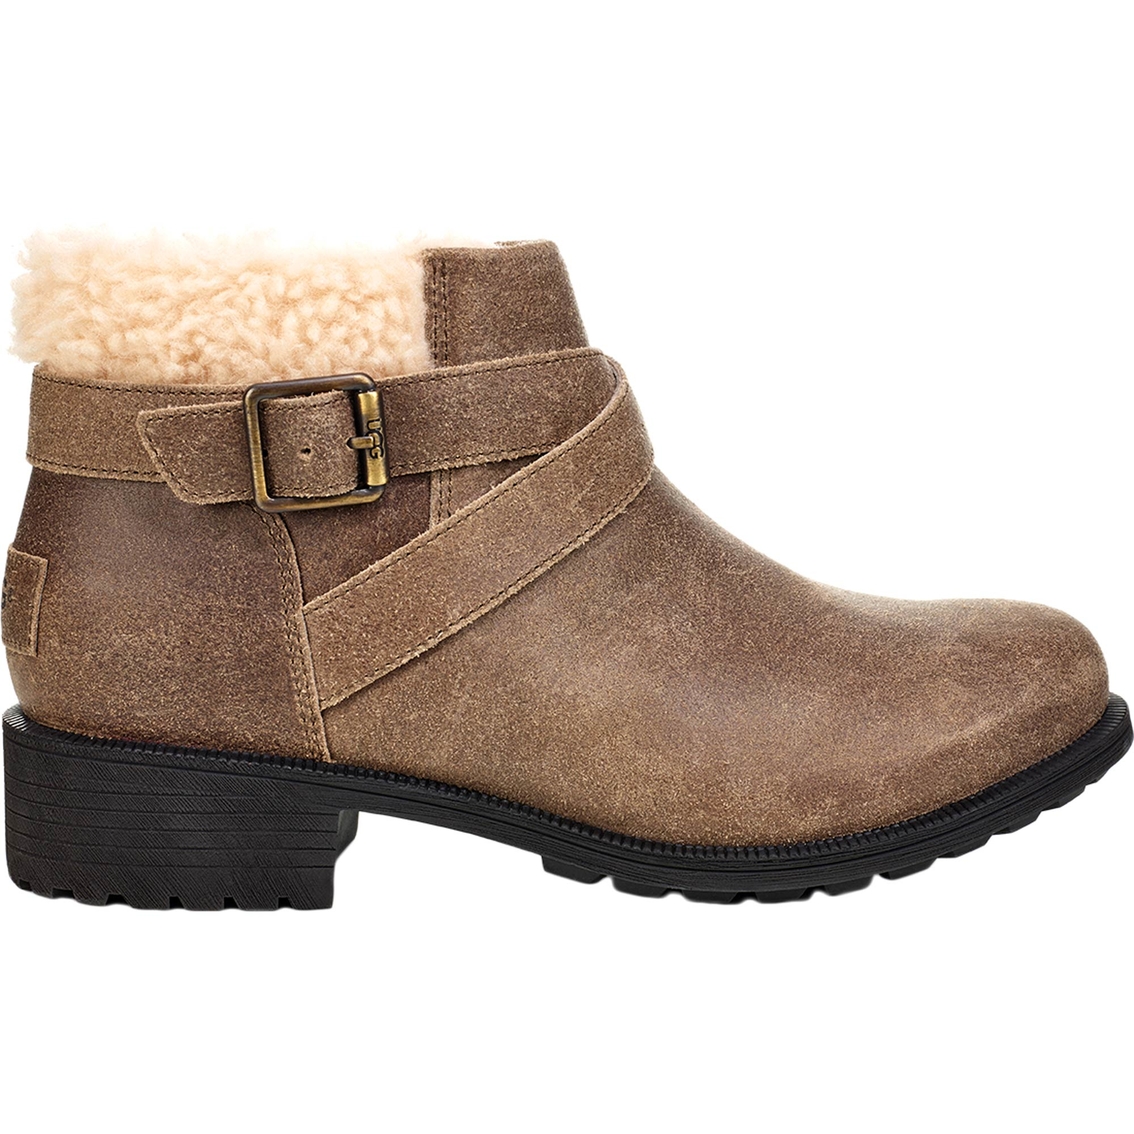 Ugg Benson Boots | Tall Boots | Shoes | Shop The Exchange